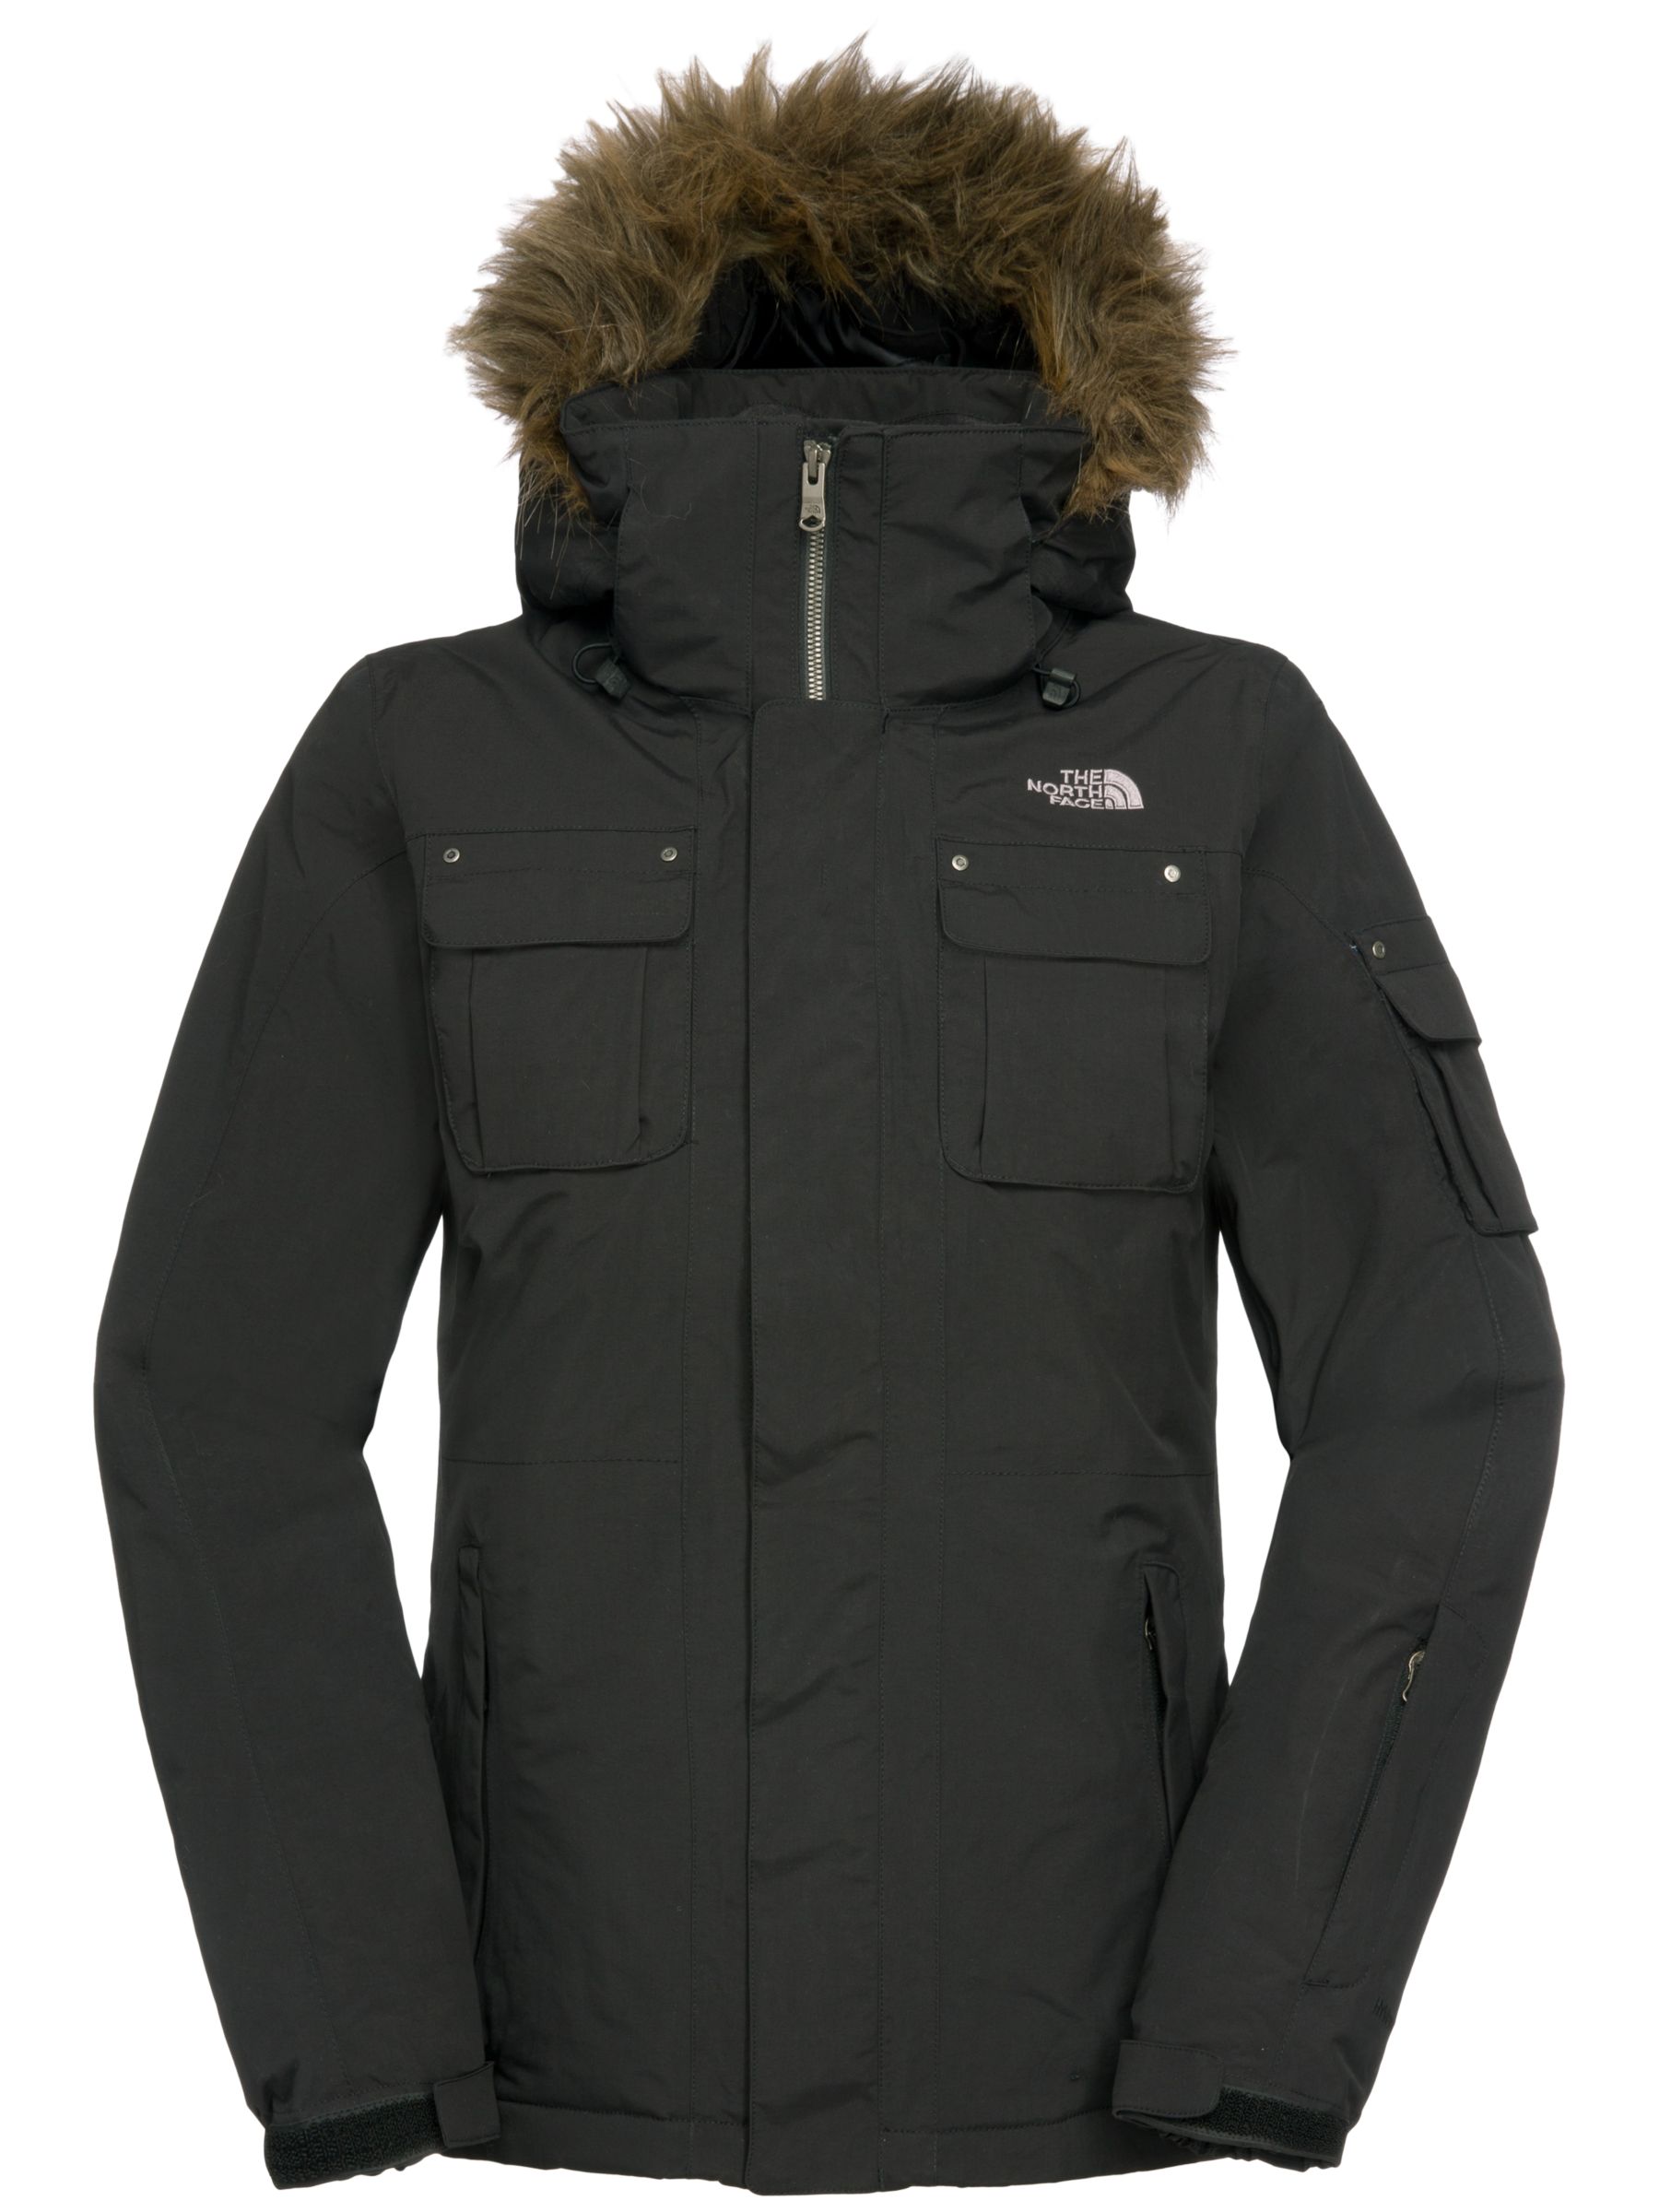 The North Face Baker Women's Jacket 